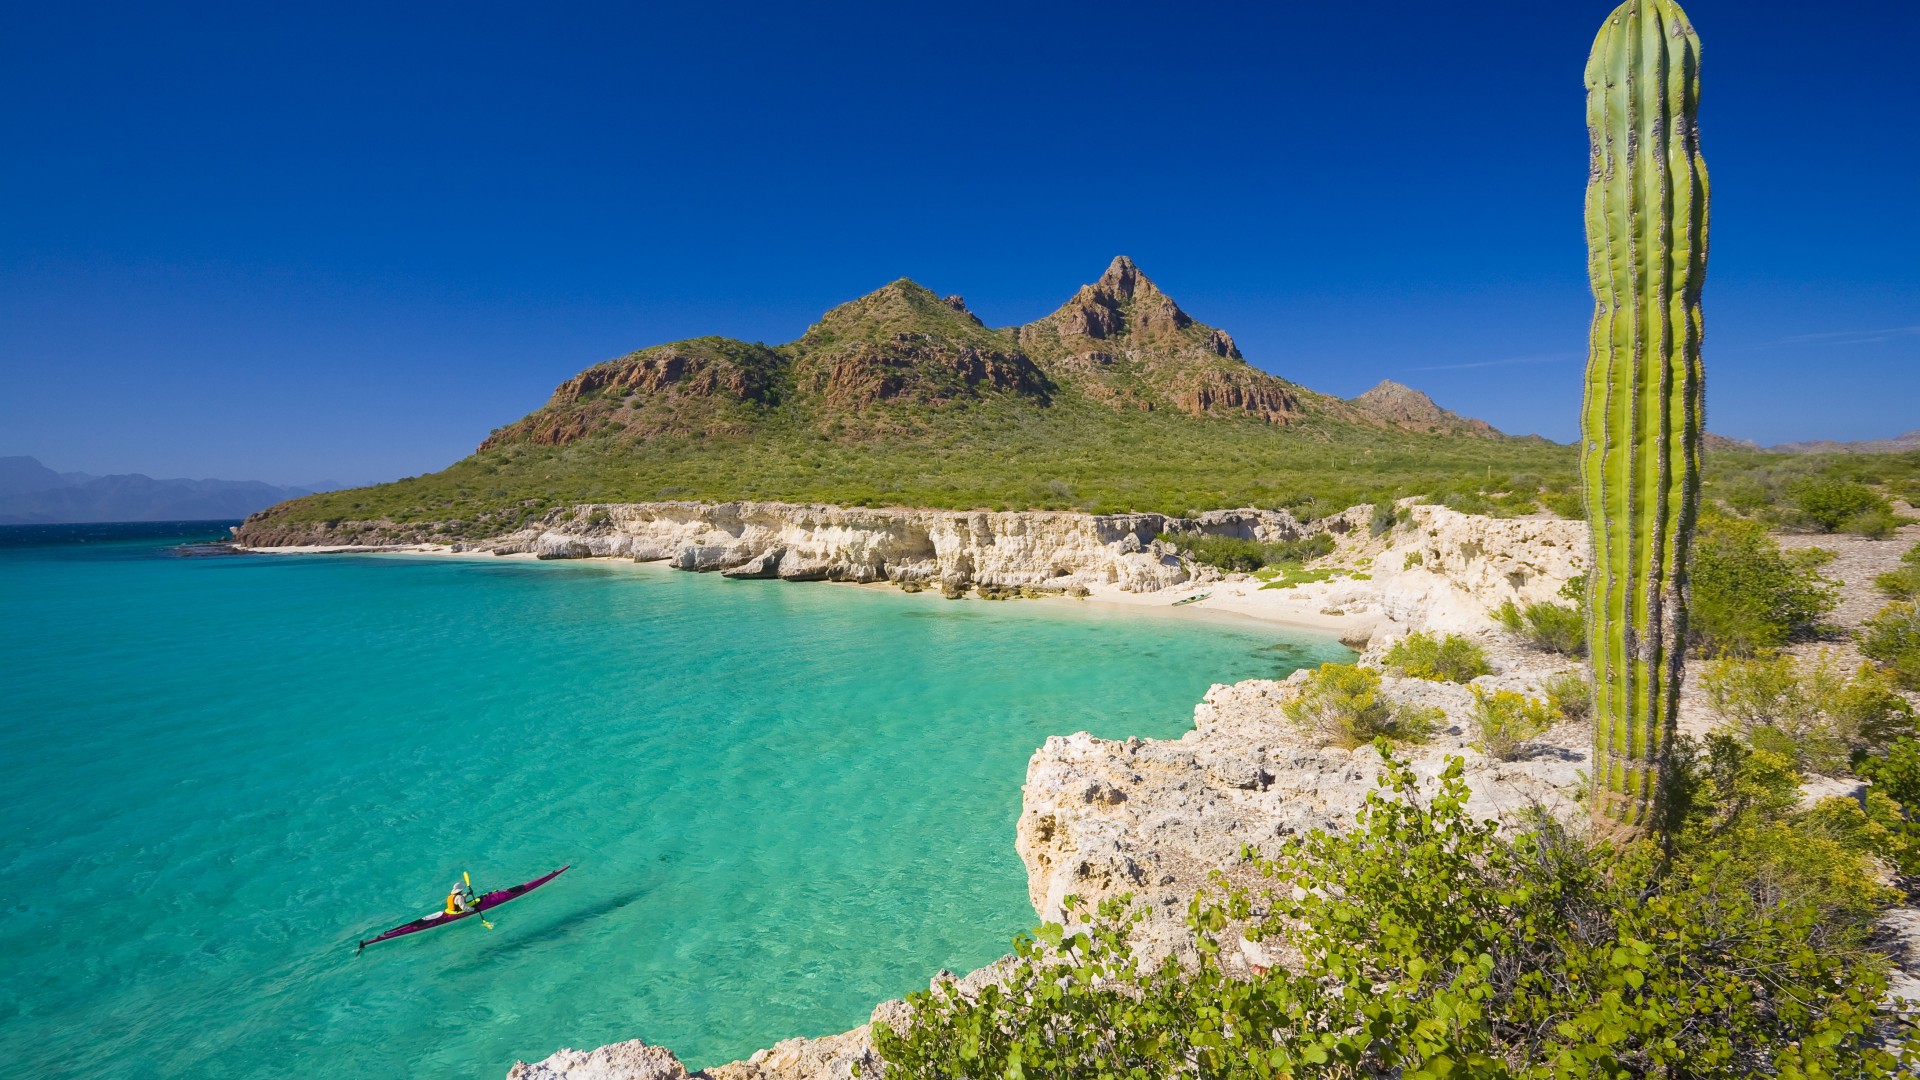 Sea kayaker paddling through a scenic cove atop turquoise waters with Carmen Island in the background